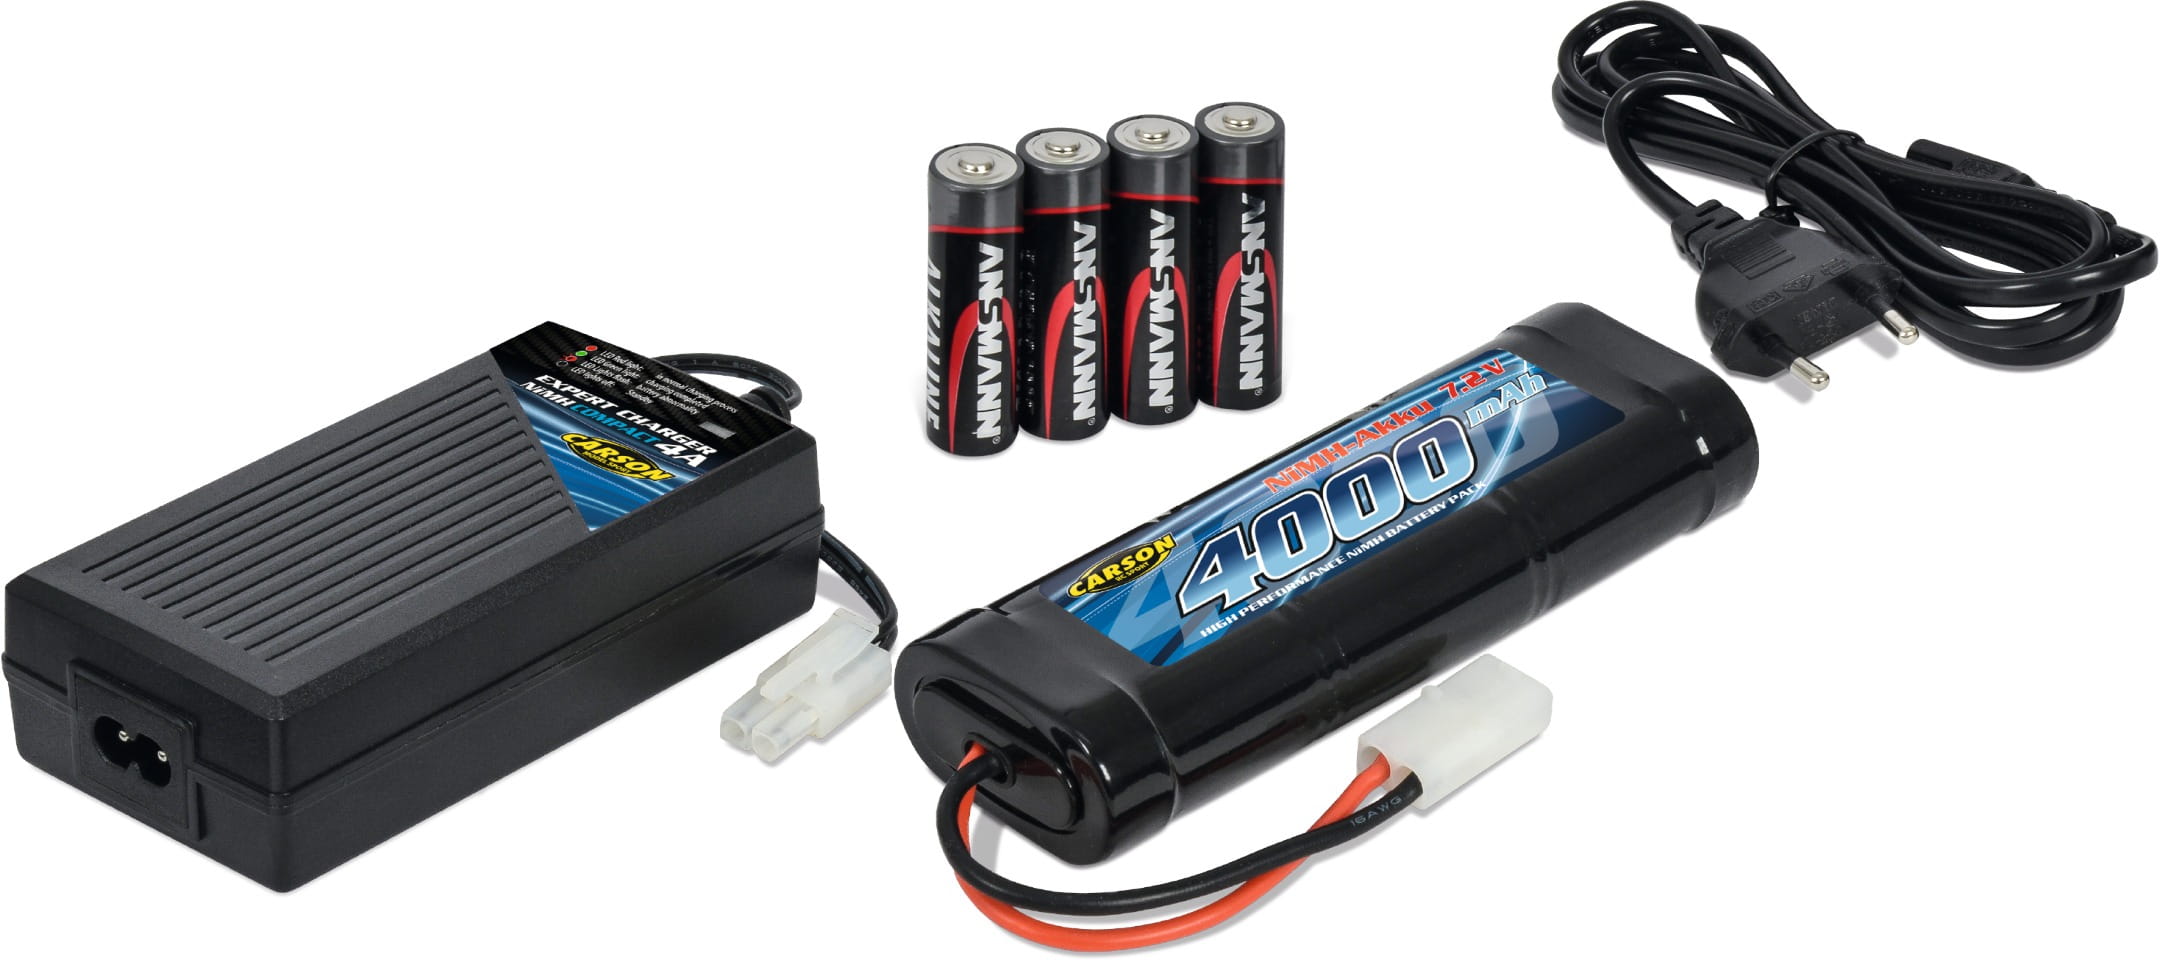 Carson Ladegerät Expert Charger NiMH Compact 4A Lade Set